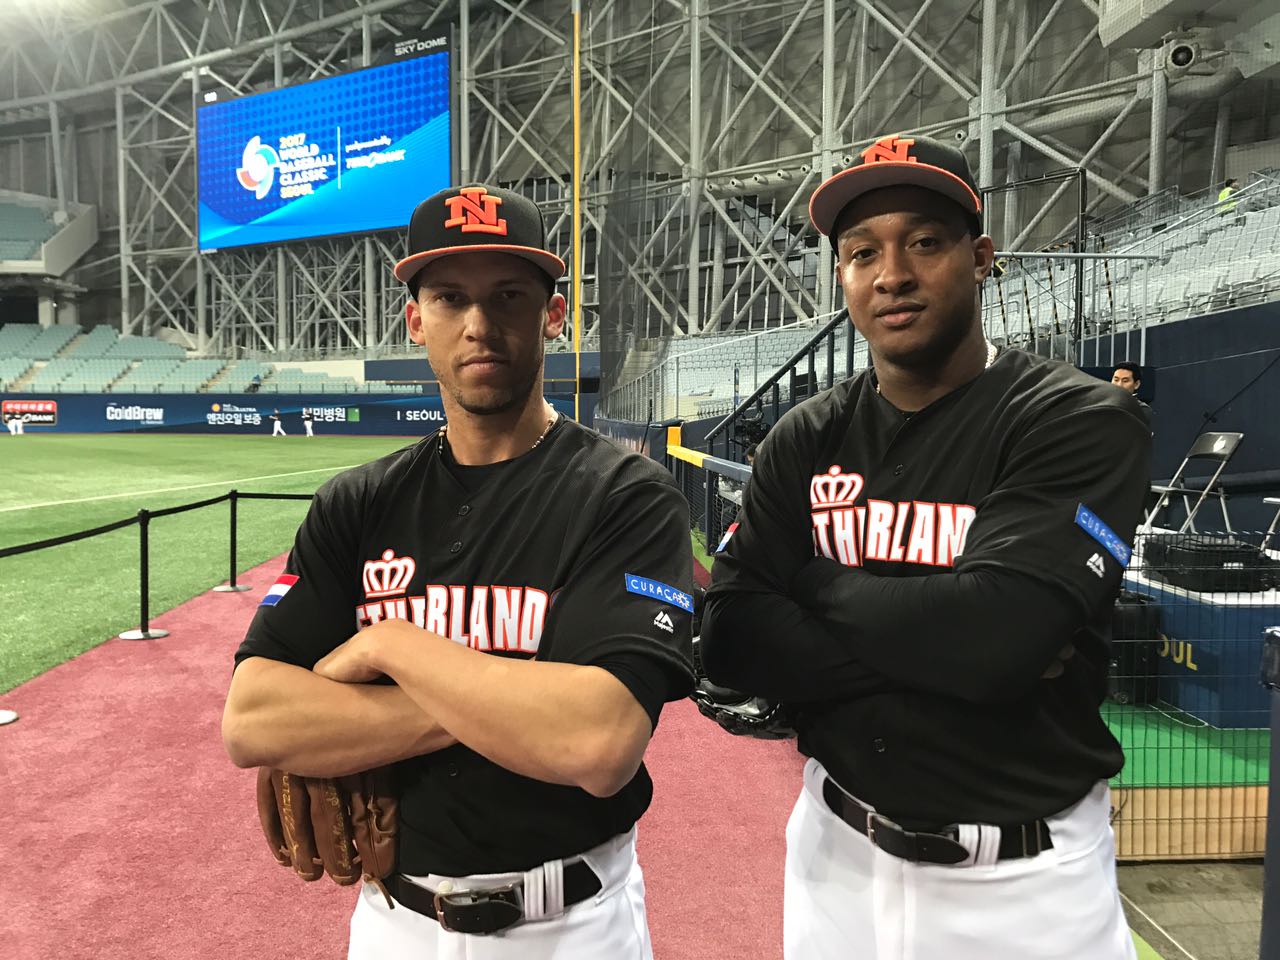 Curaçao Promoted on the Kingdom of the Netherlands’ team shirts at the World Baseball Classic